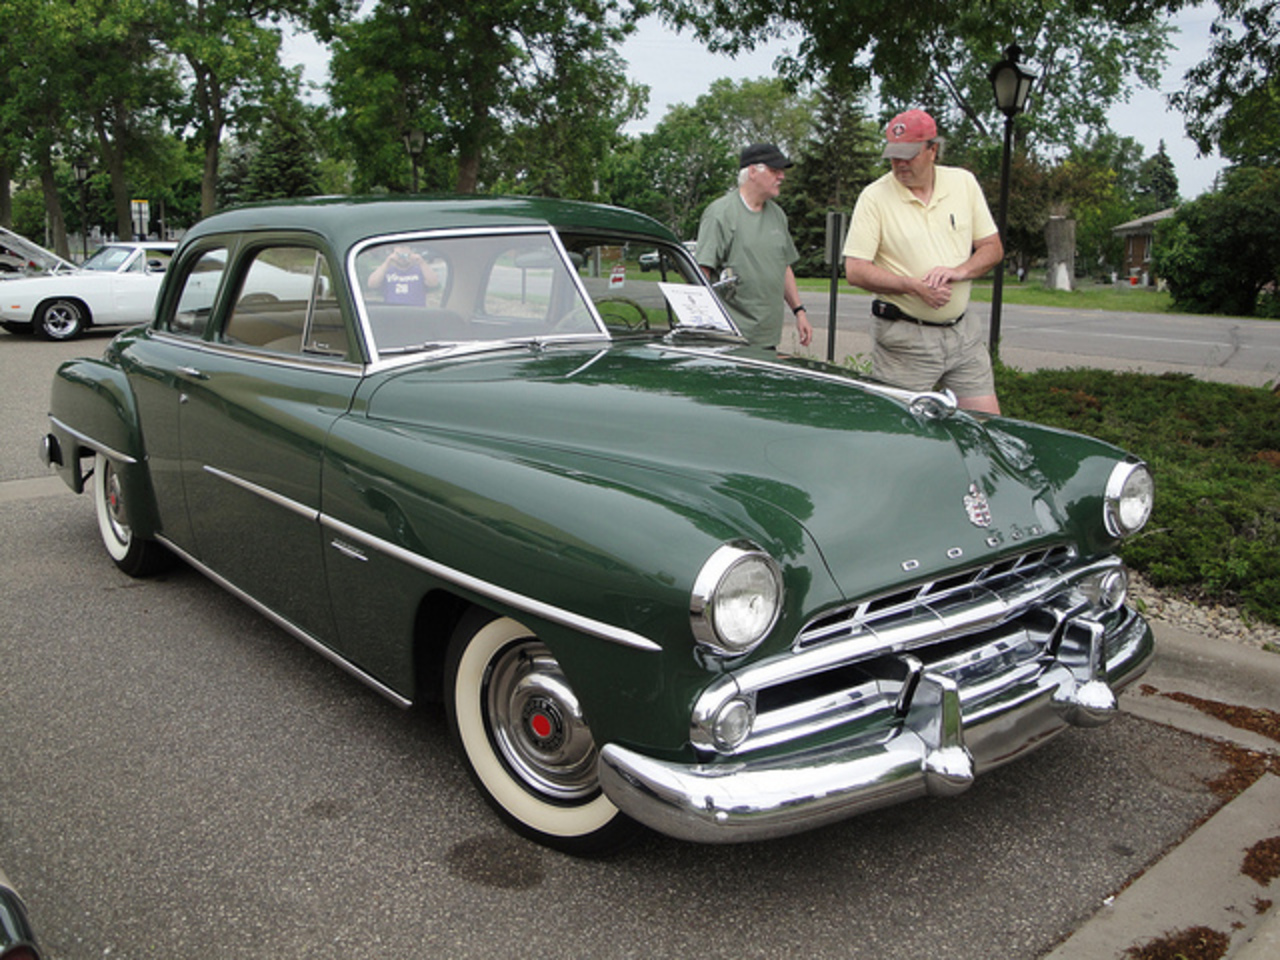 51 Dodge Coronet Club Coupe | Flickr - Photo Sharing!